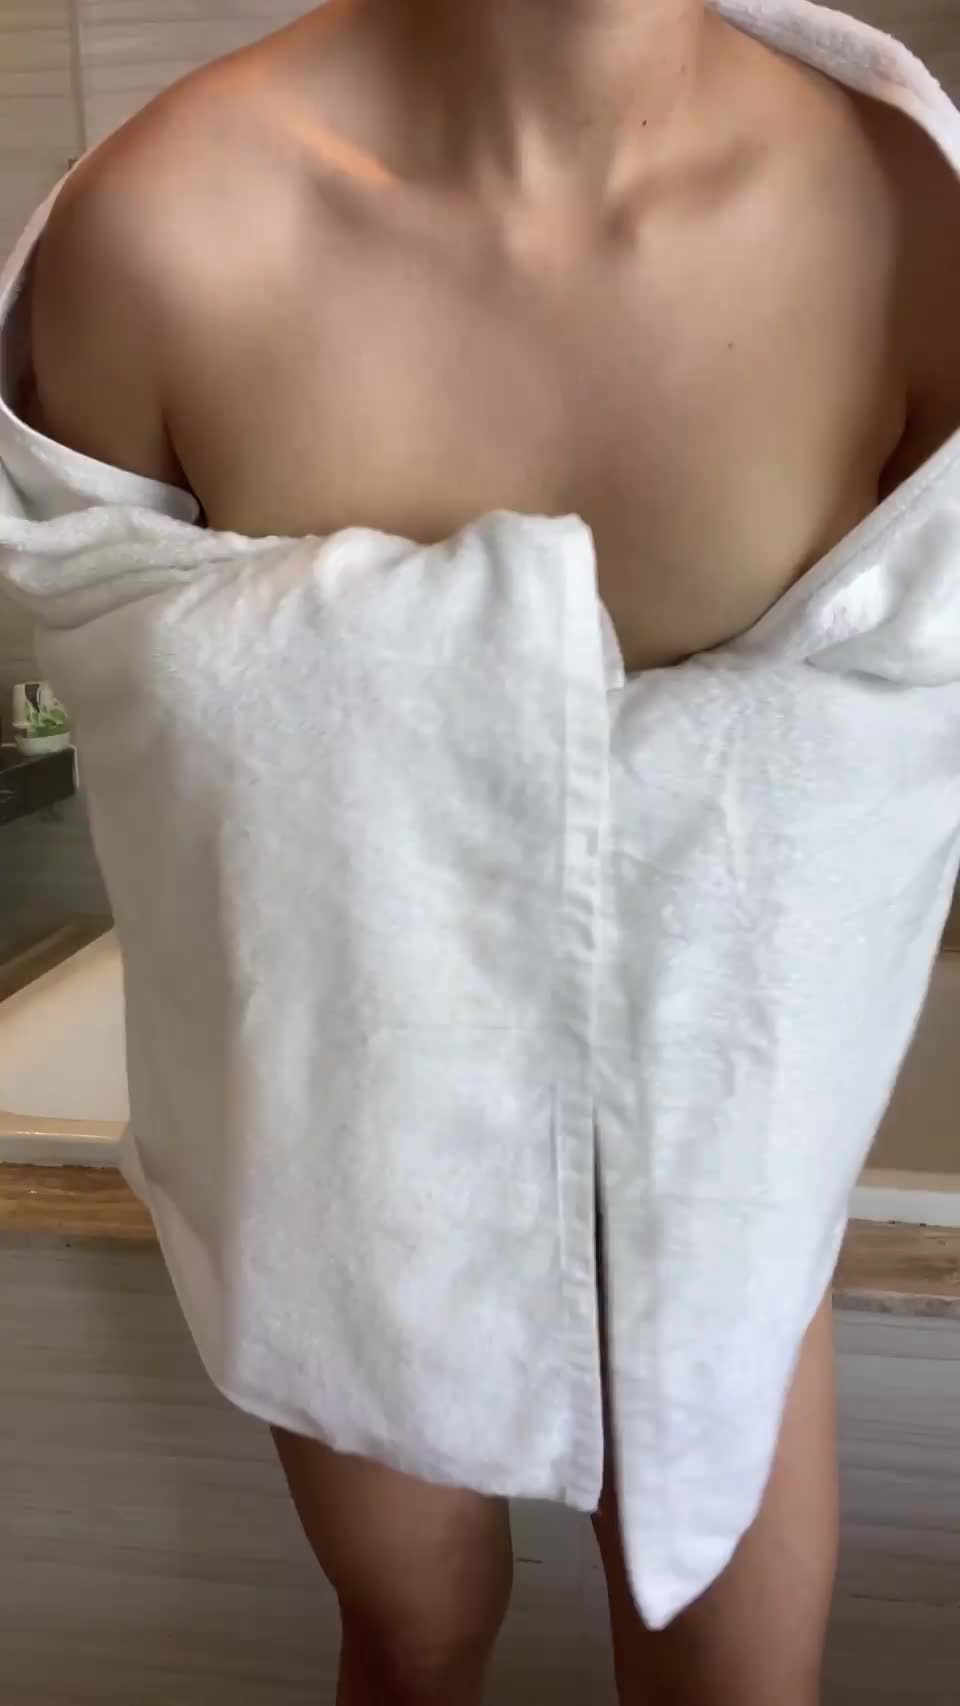 Can you make me dripping wet even before we take a bath? 🥺 : video clip